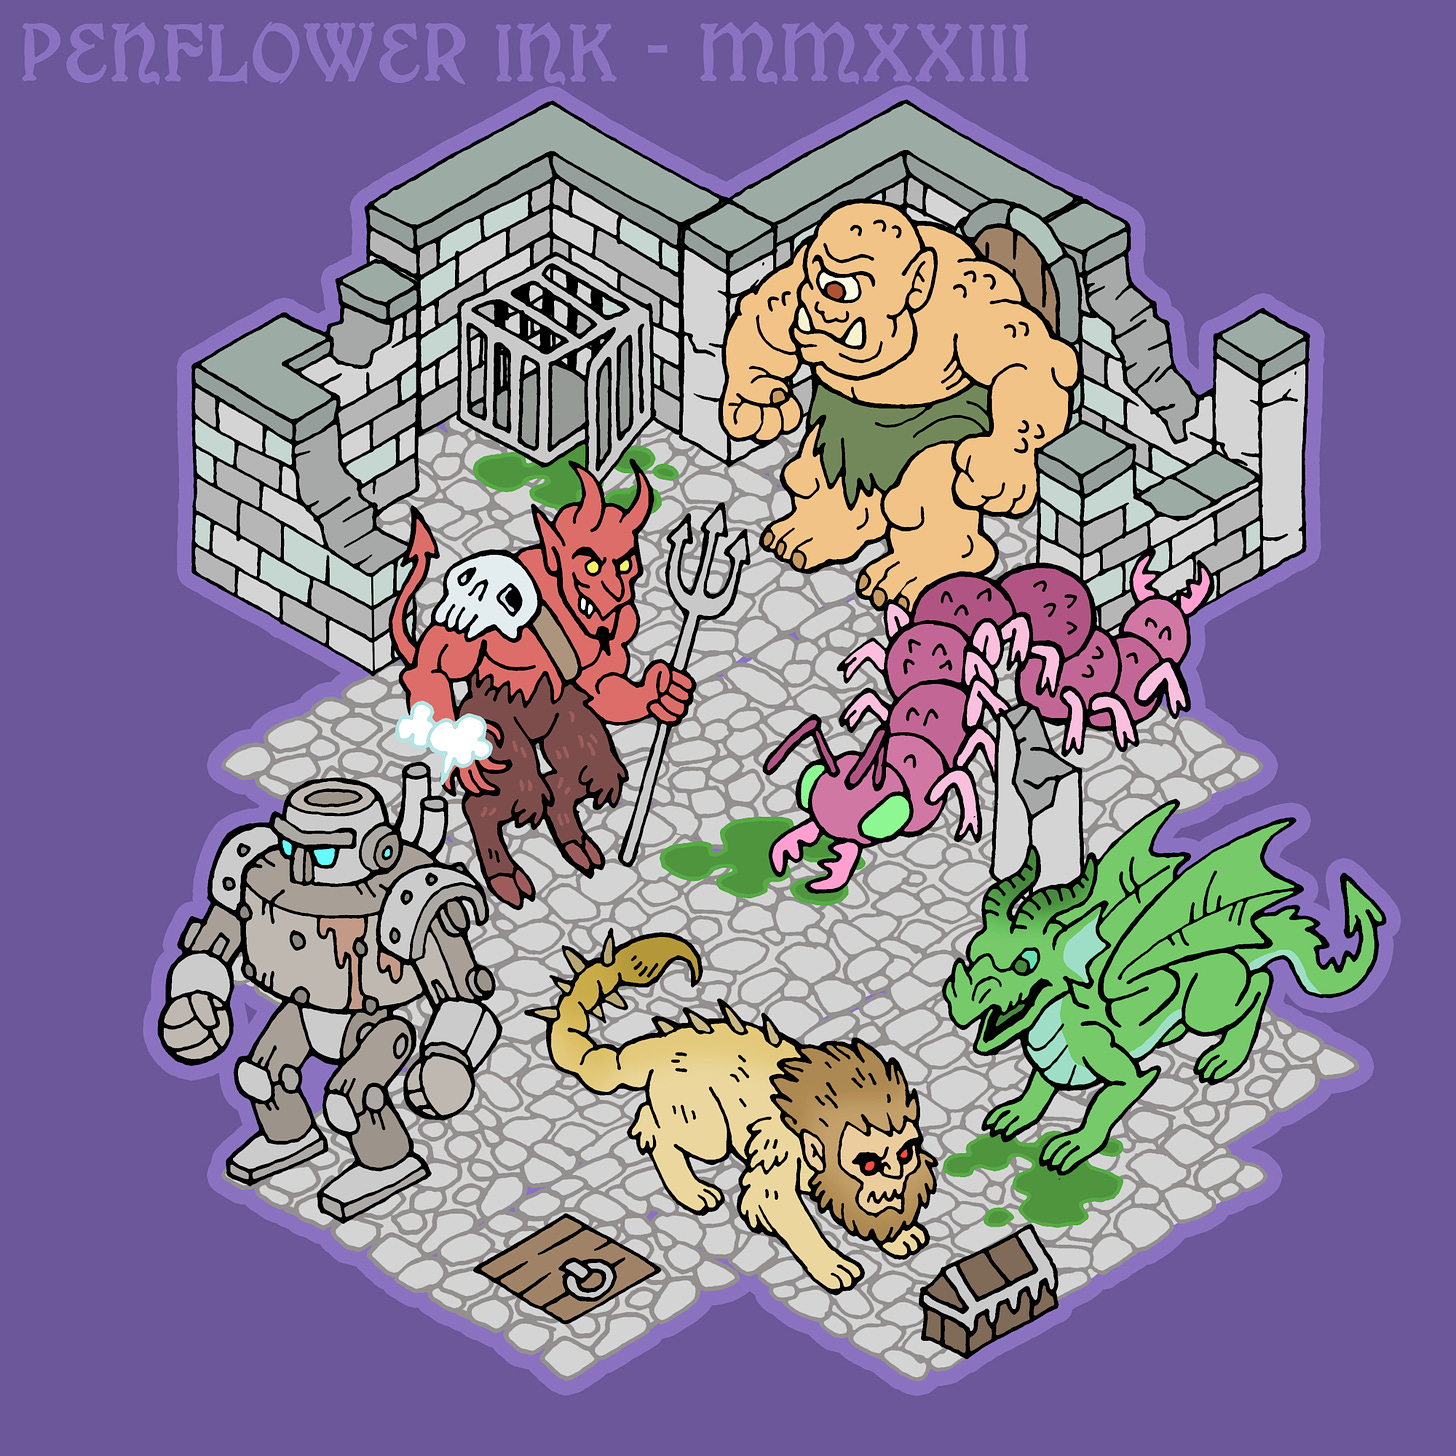 Composite image made using the various modular dungeon art assets. A large dungeon contains a hulking cyclops, a grinning devil, a giant centipede, a snarling green dragon, a rusty metal construct and a skulking manticore.